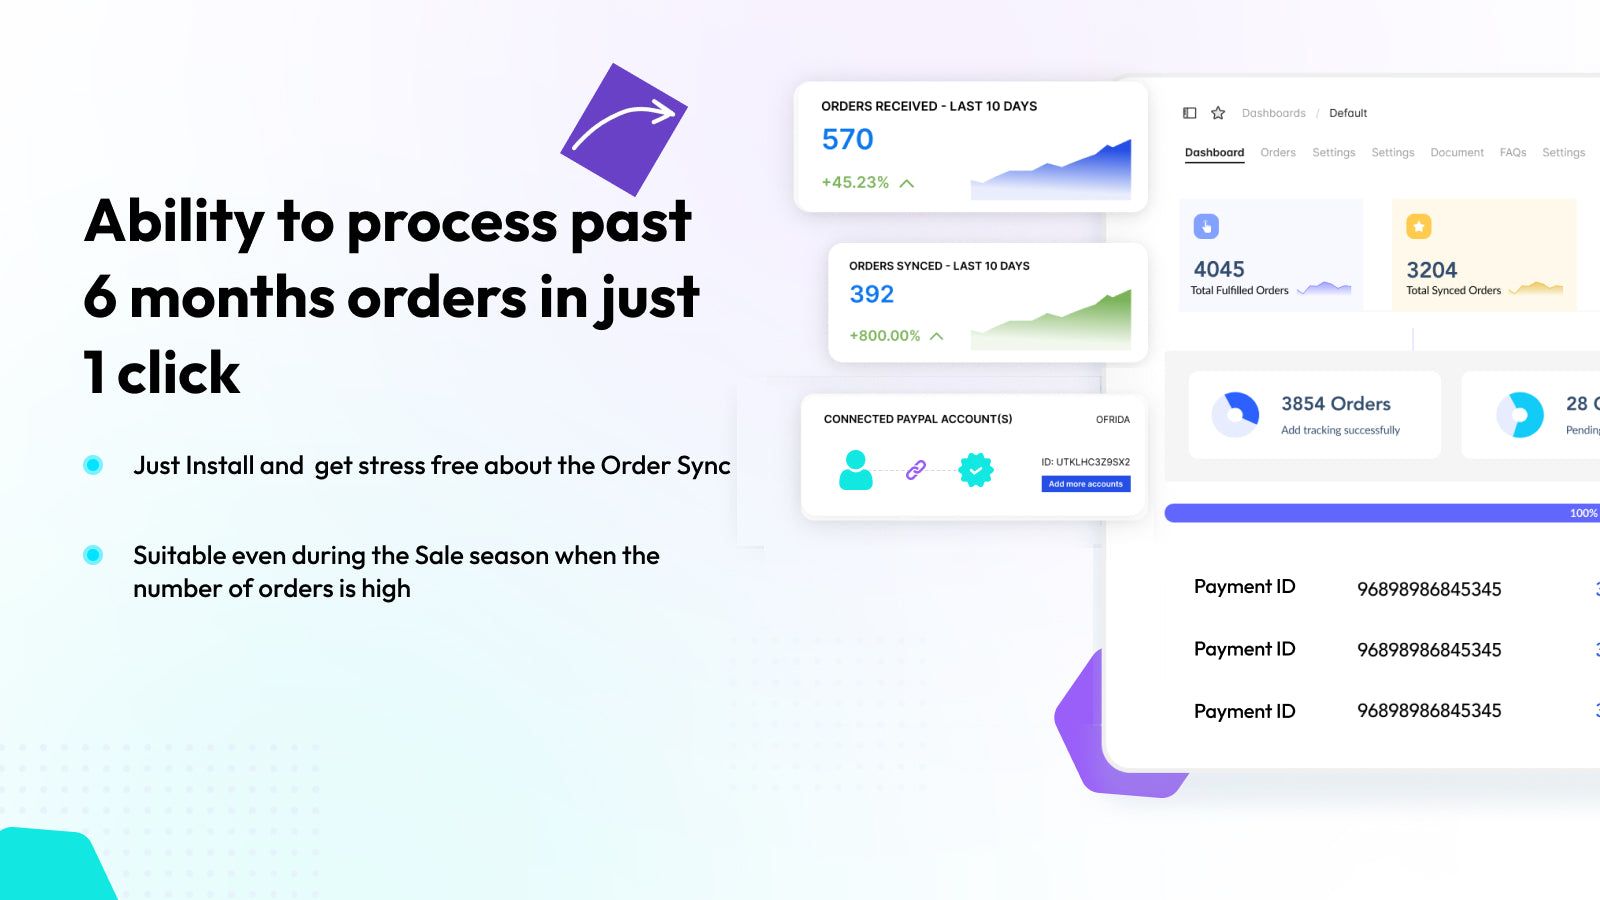 Ability to process past 6 months orders in just 1 click